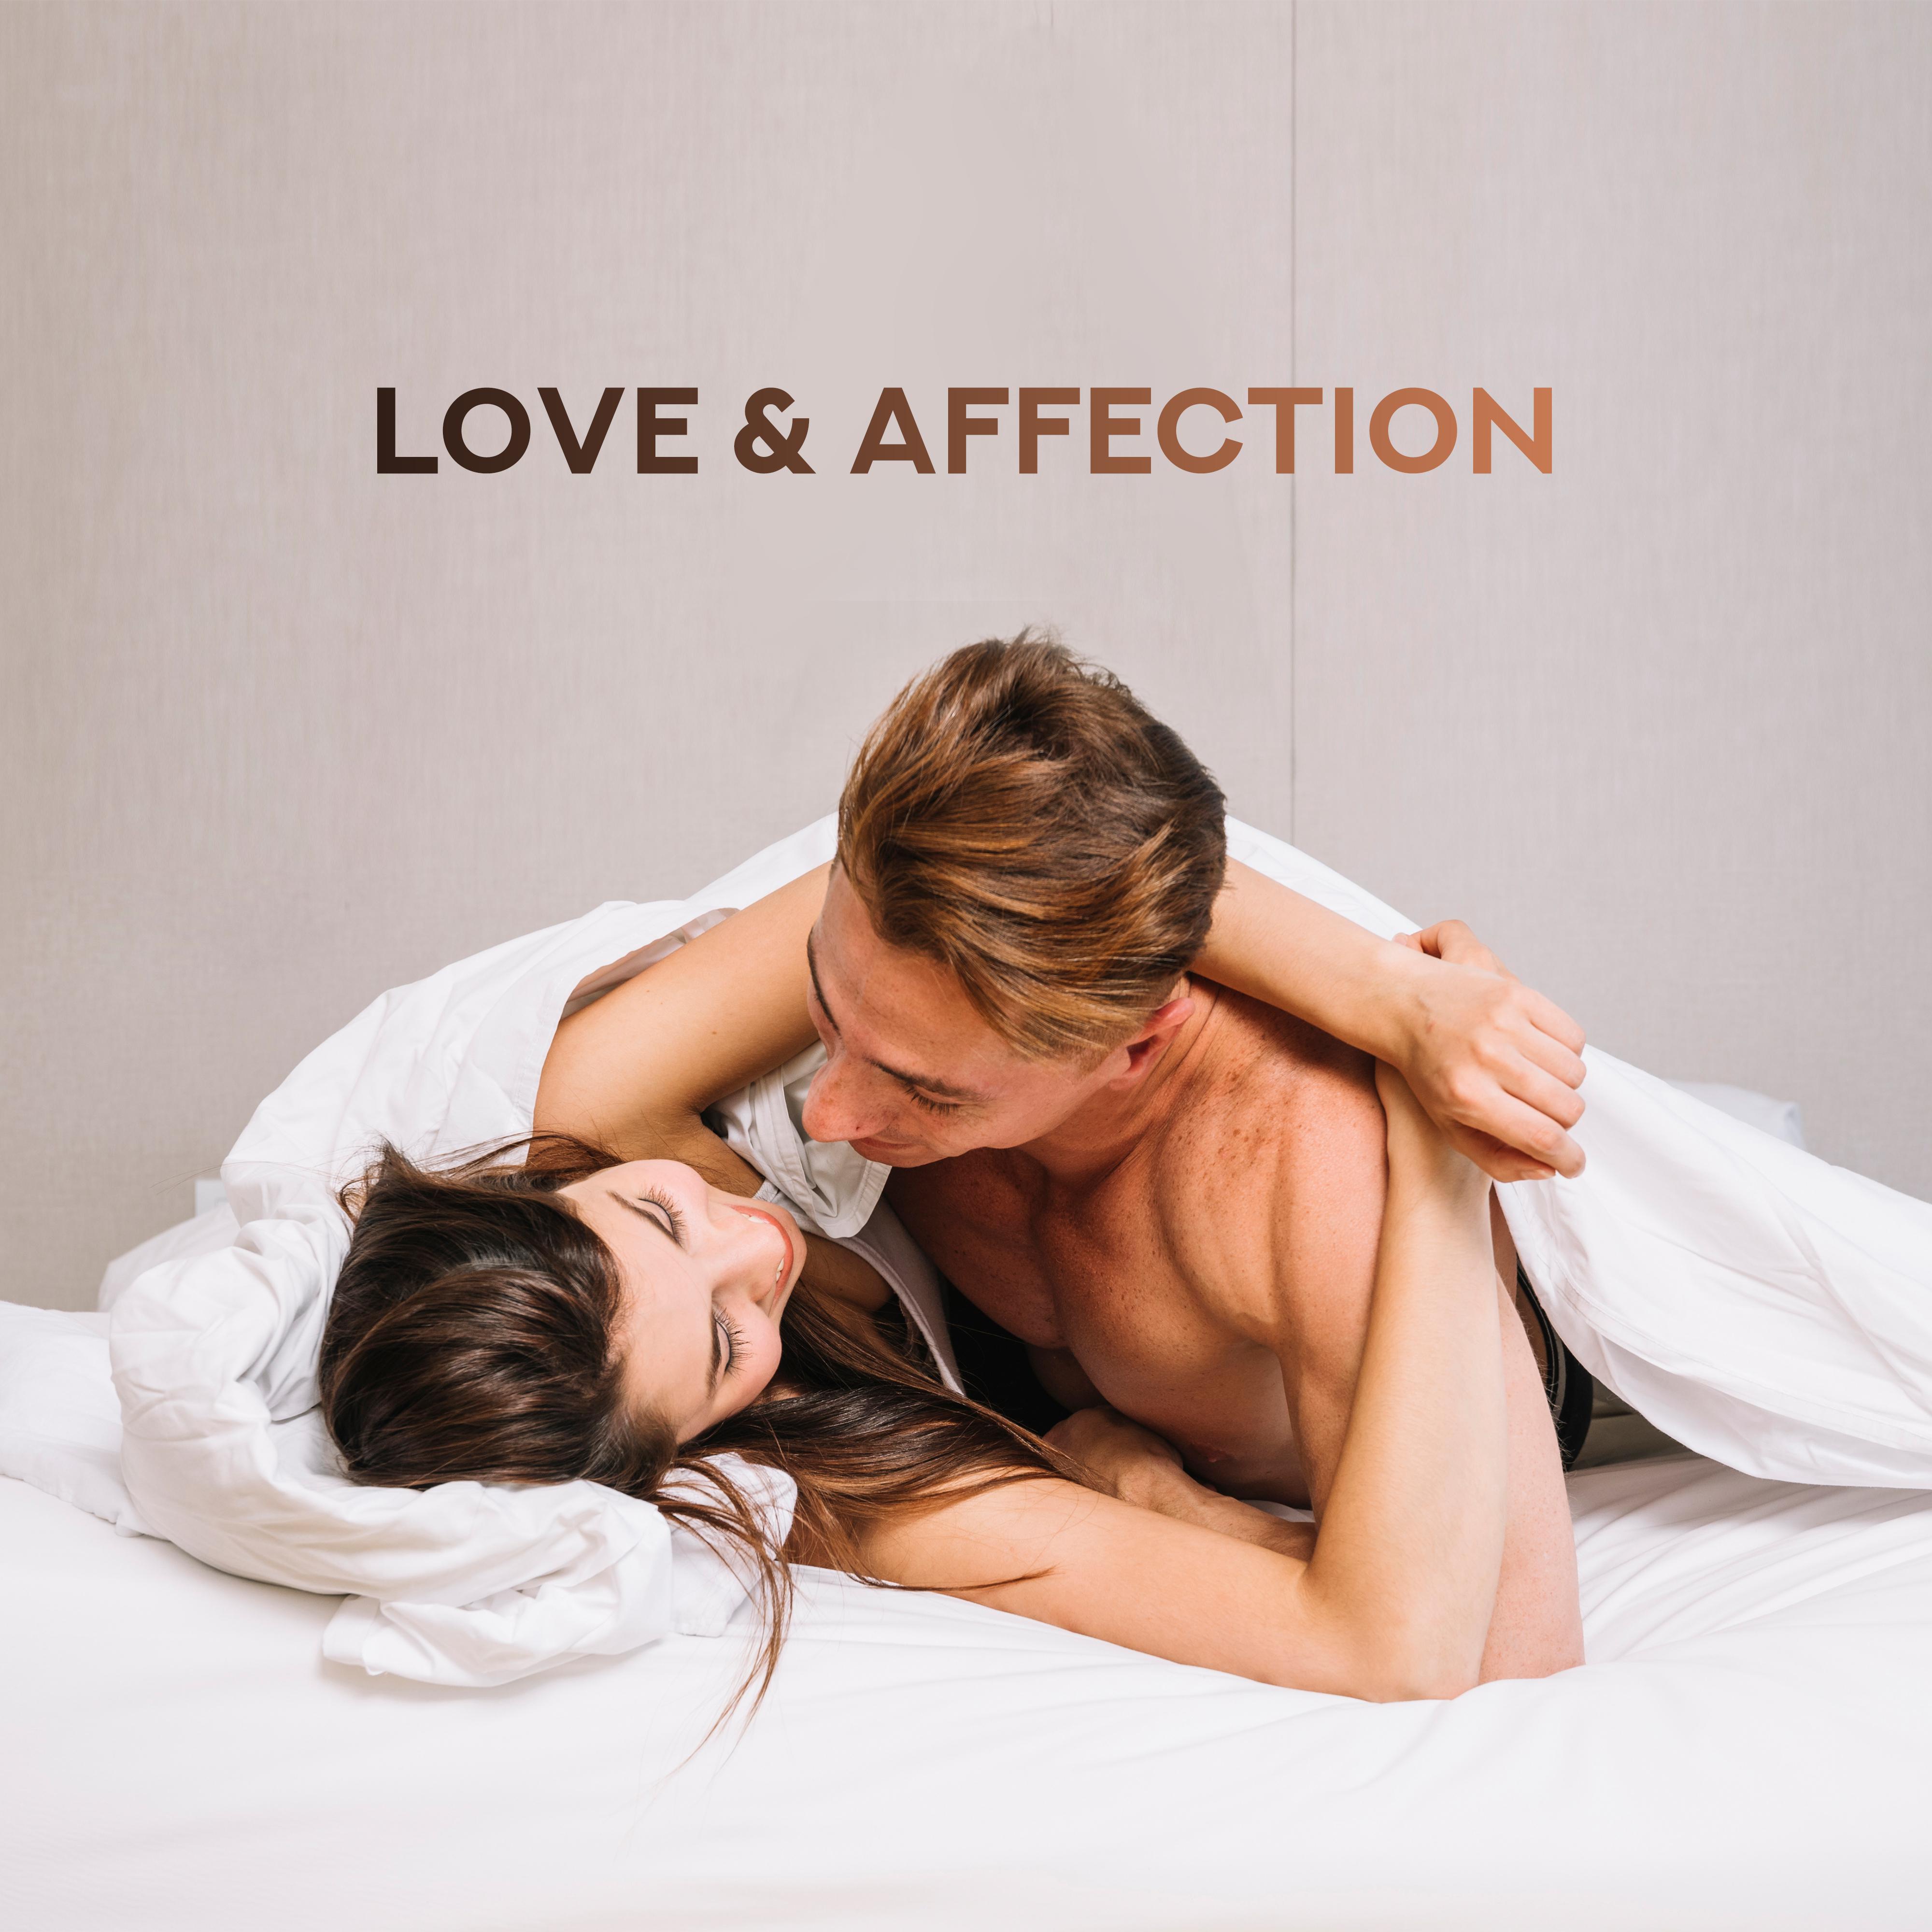 Love & Affection: Full of Sensuality, Jazz Instrumental Songs for Lovers